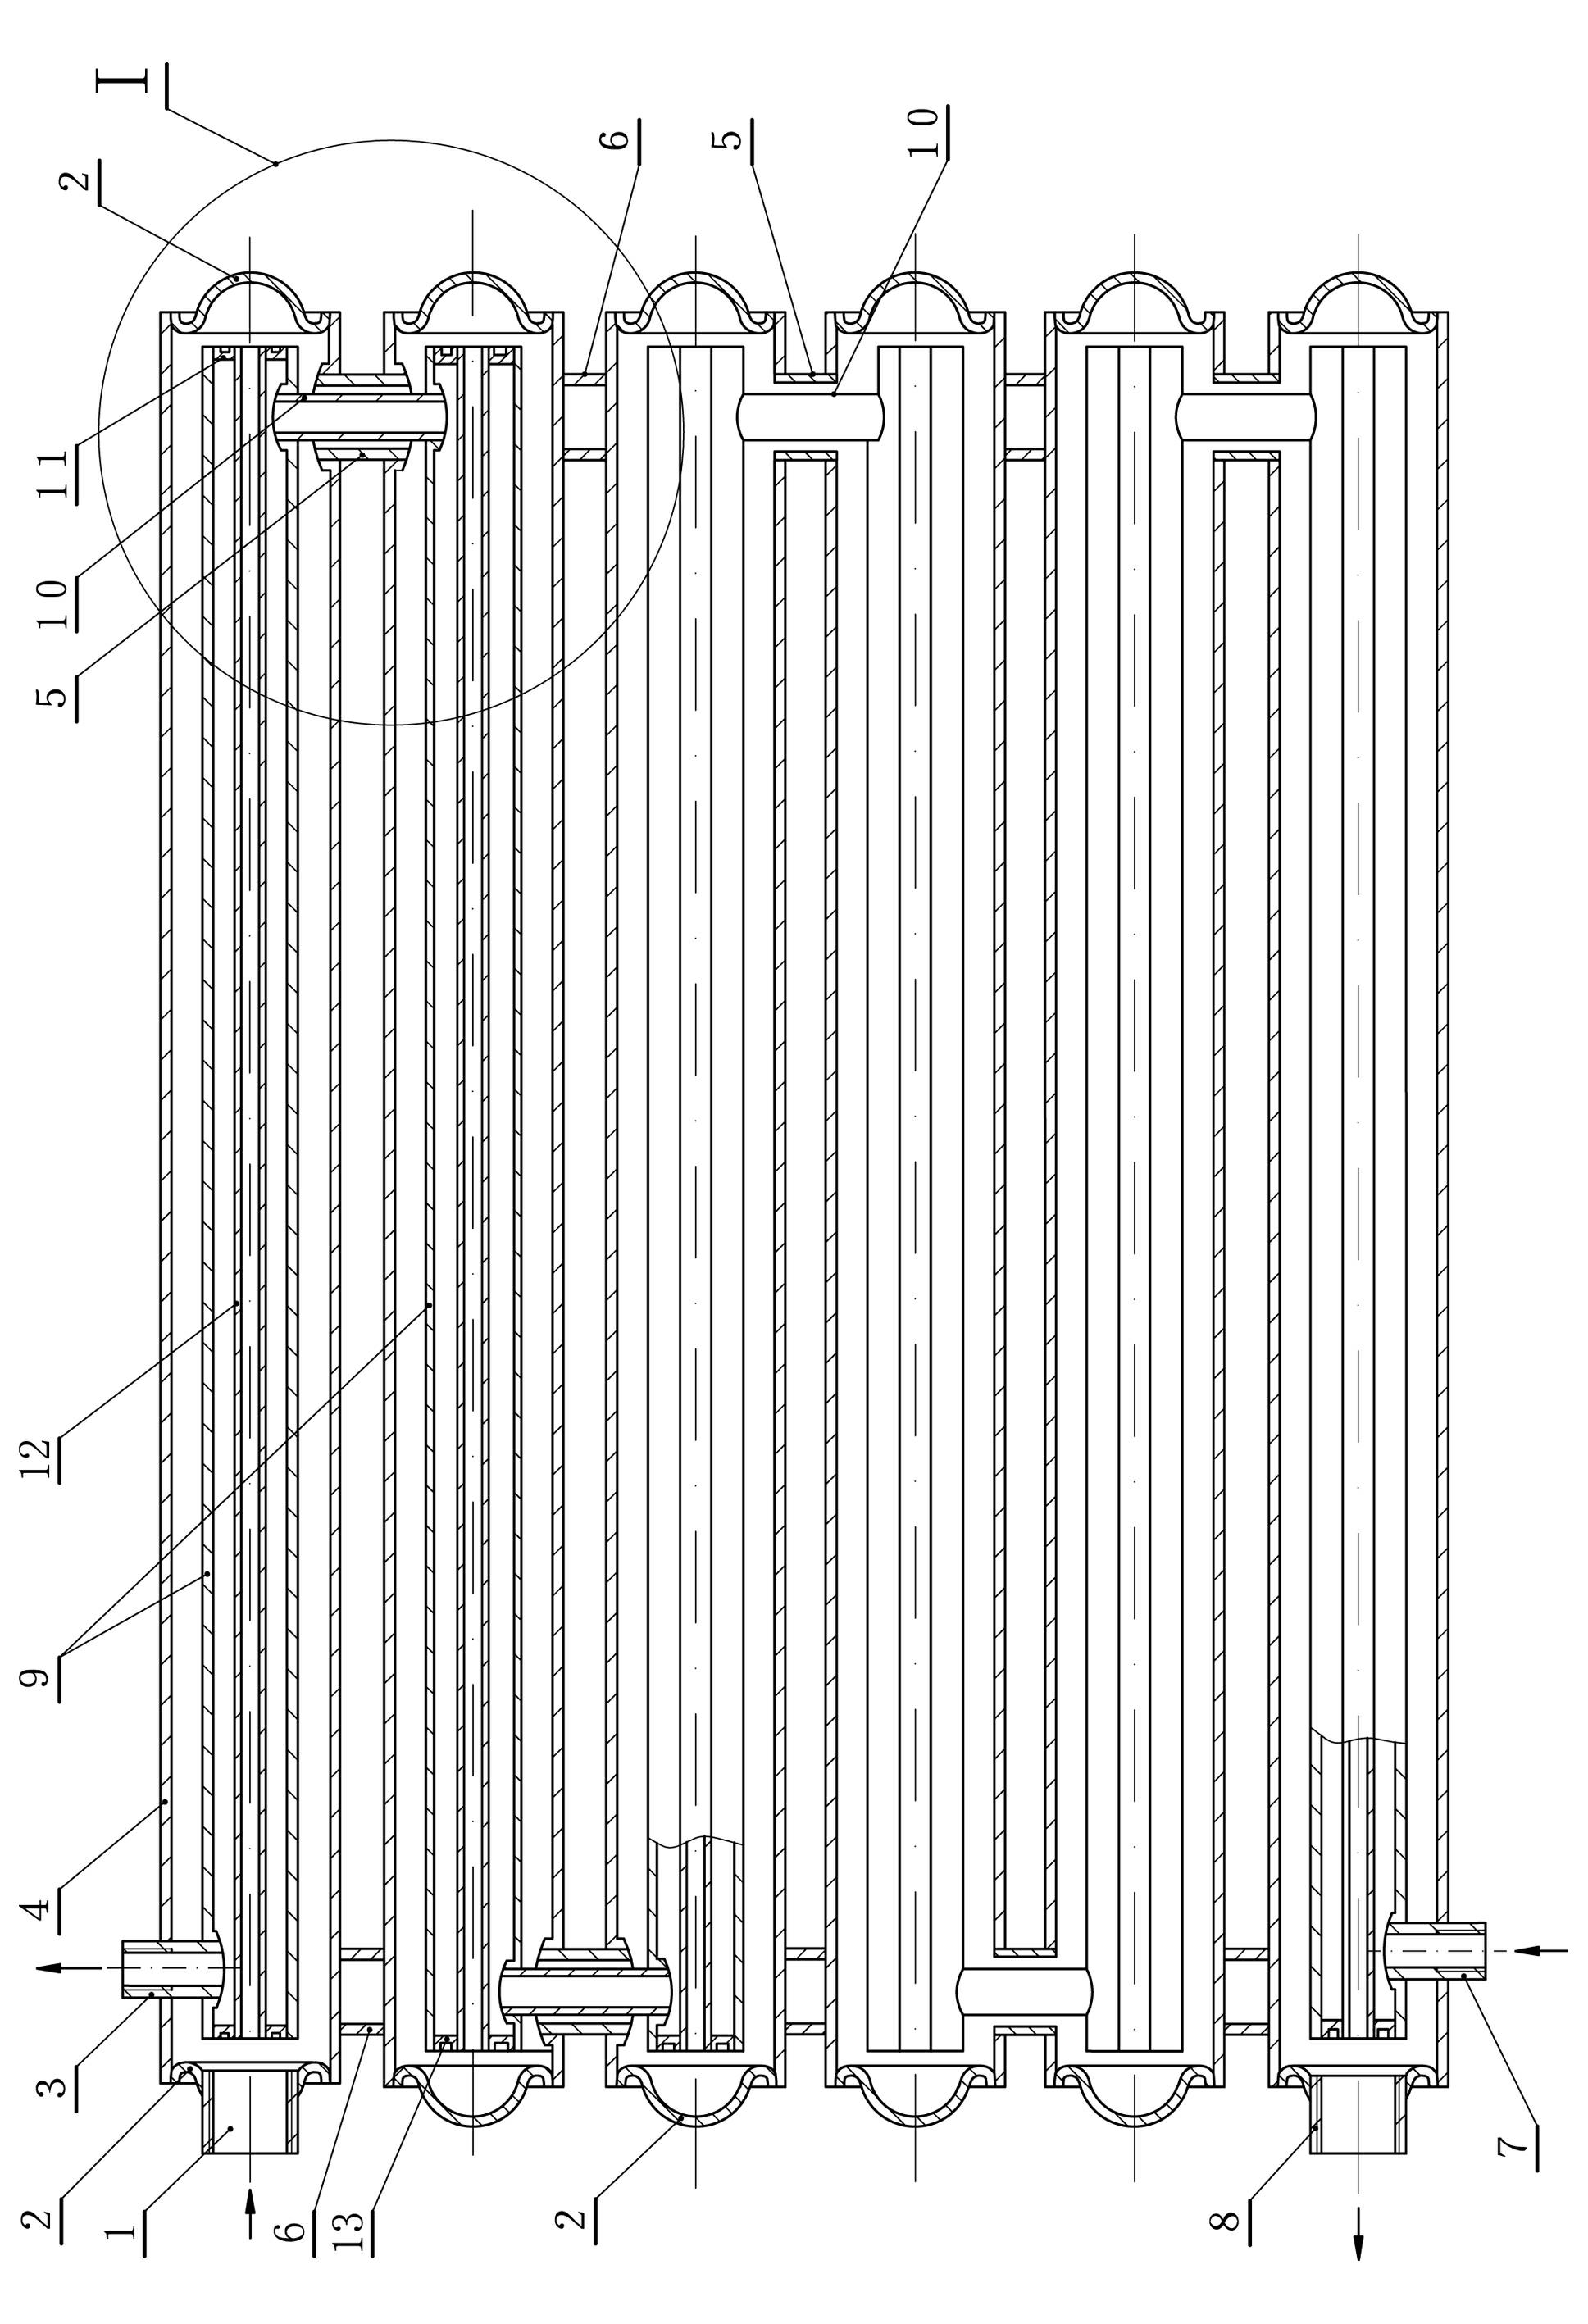 Heat-transfer heat exchanger with double-channel heat supply pipes and production process of heat-transfer heat exchanger with double-channel heat supply pipes